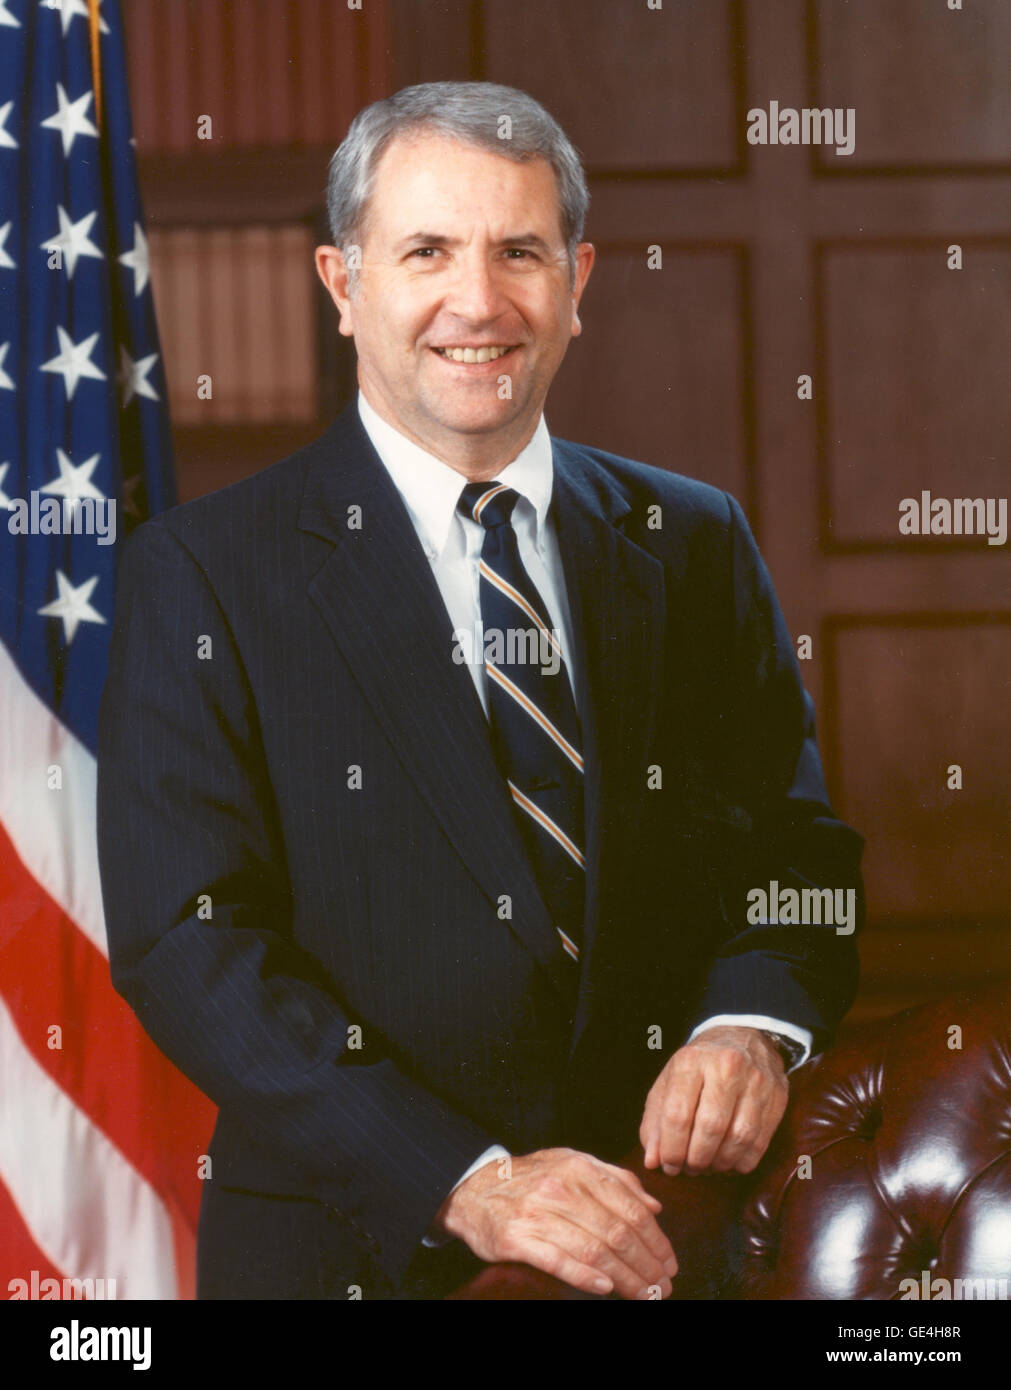 Vice Admiral Richard H. Truly served as NASA's eighth Administrator from May 14, 1989 to March 31, 1992. Prior to becoming Administrator, Truly served as NASA's Associate Administrator for Space Flight. In this position, he led the painstaking rebuilding of the Space Shuttle program after the Challenger accident. Truly's career began in the Navy; in 1965, he became one of the first military astronauts selected to the Air Force's Manned Orbiting Laboratory program in Los Angeles, California. He transferred to NASA as an astronaut in August 1969 then served as capsule communicator for all three  Stock Photo